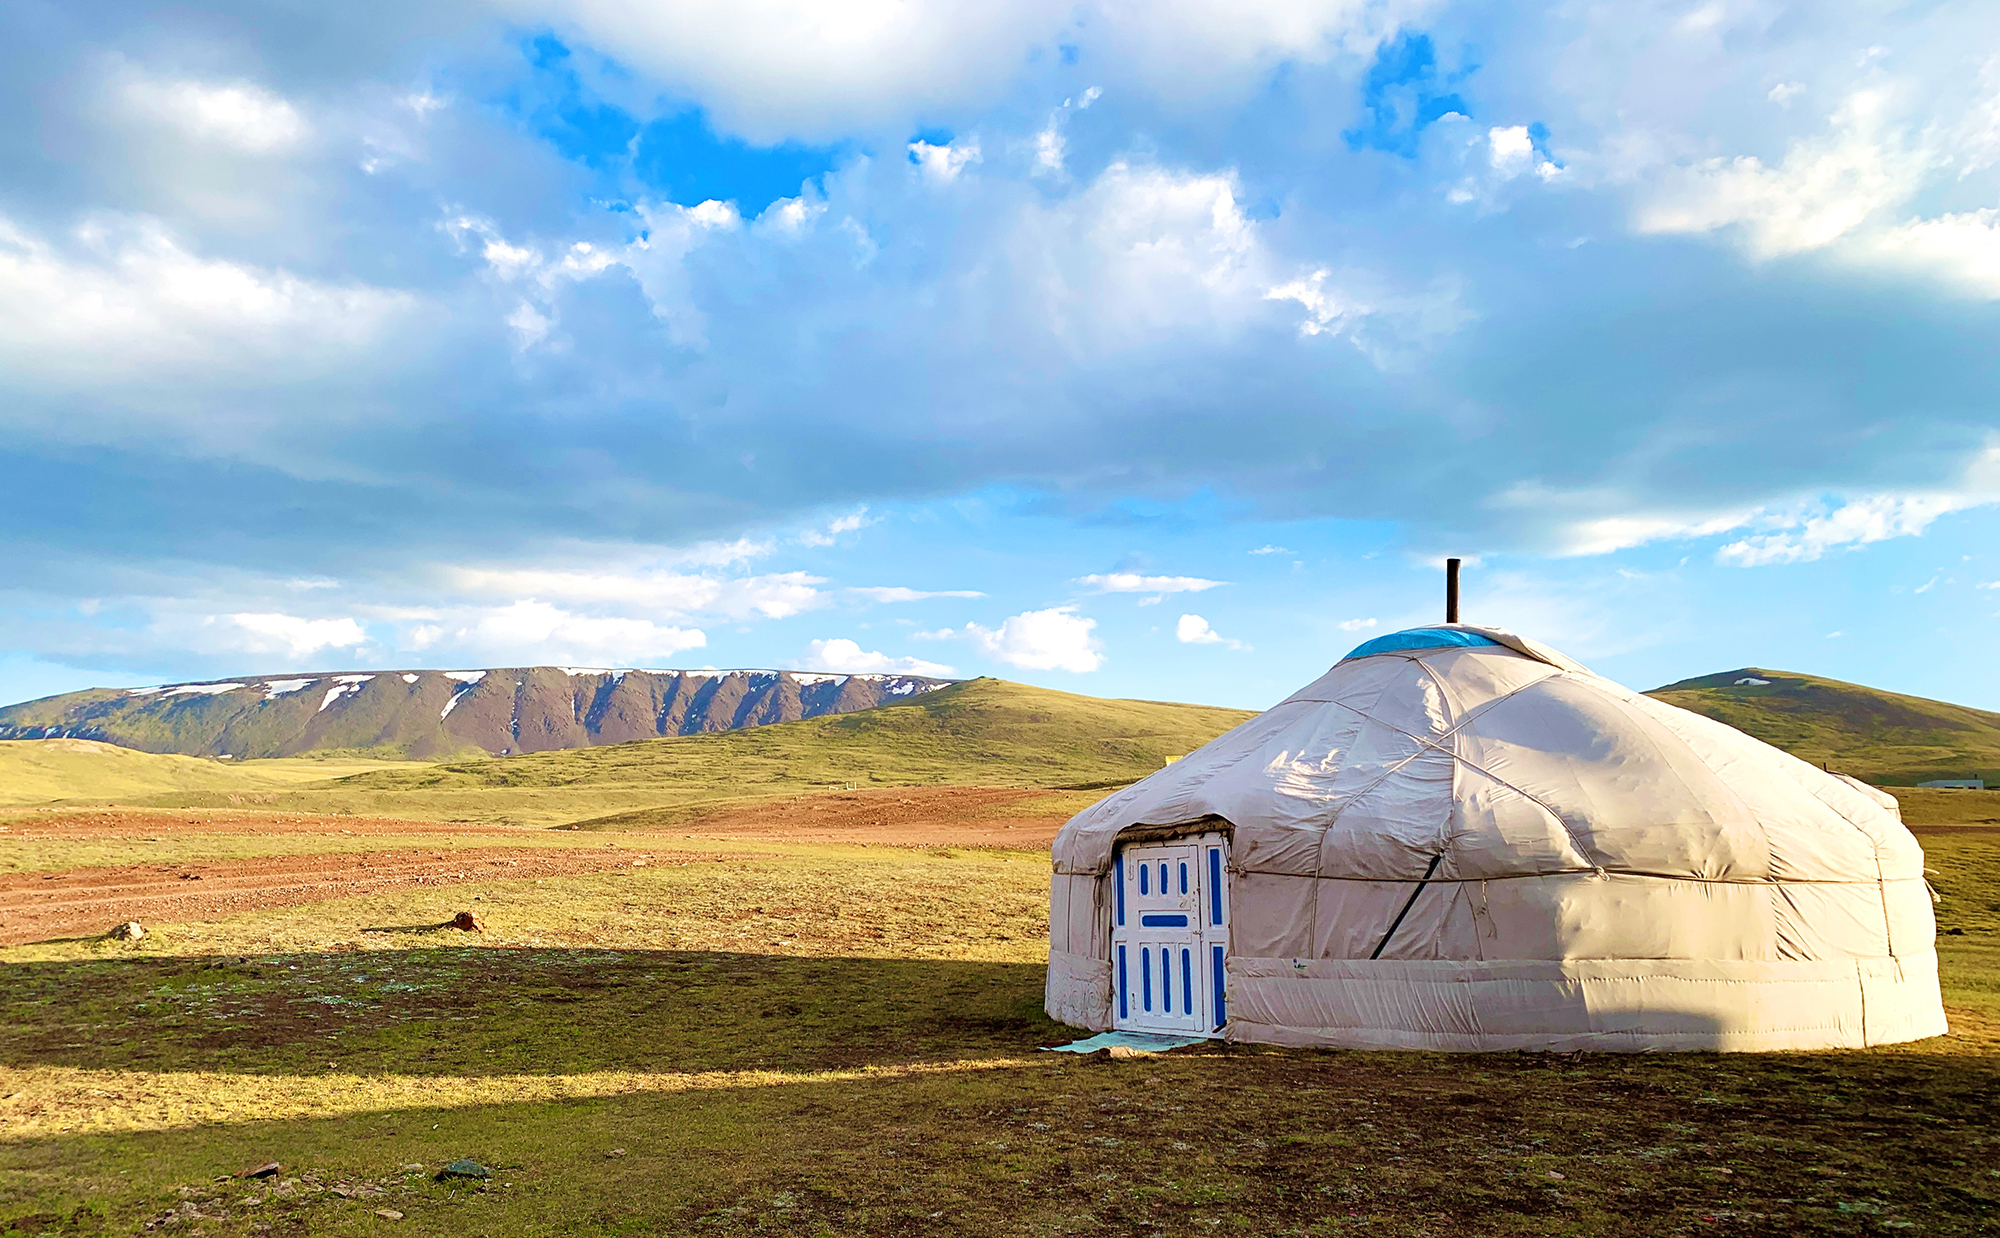 Gers, the traditional round felt tents, are portable Mongolian homes that have been inhabited by the nomads since before the time of Chinggis Khaan.